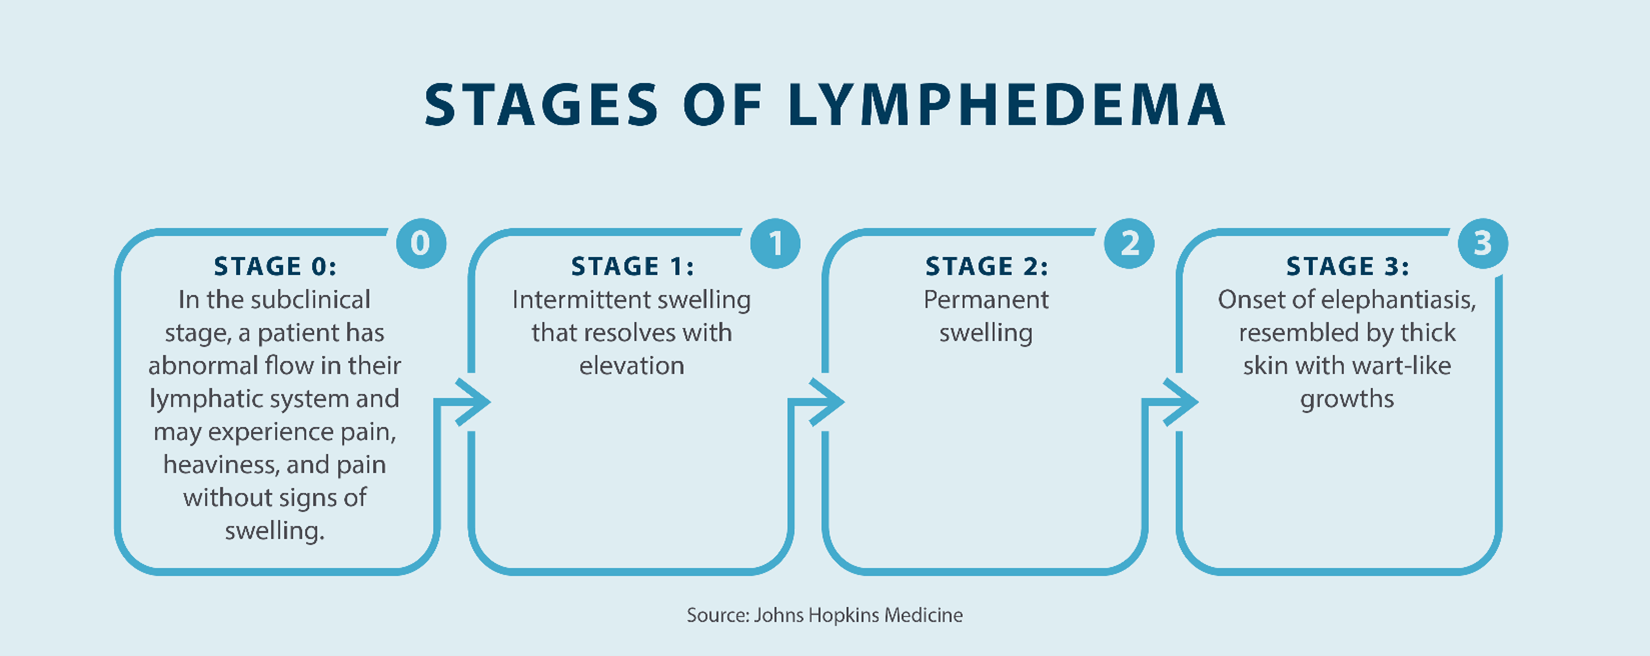 the stages of lymphedema; stage 0, stage 1, stage 2, stage 3 Source John Hopkins Medicine